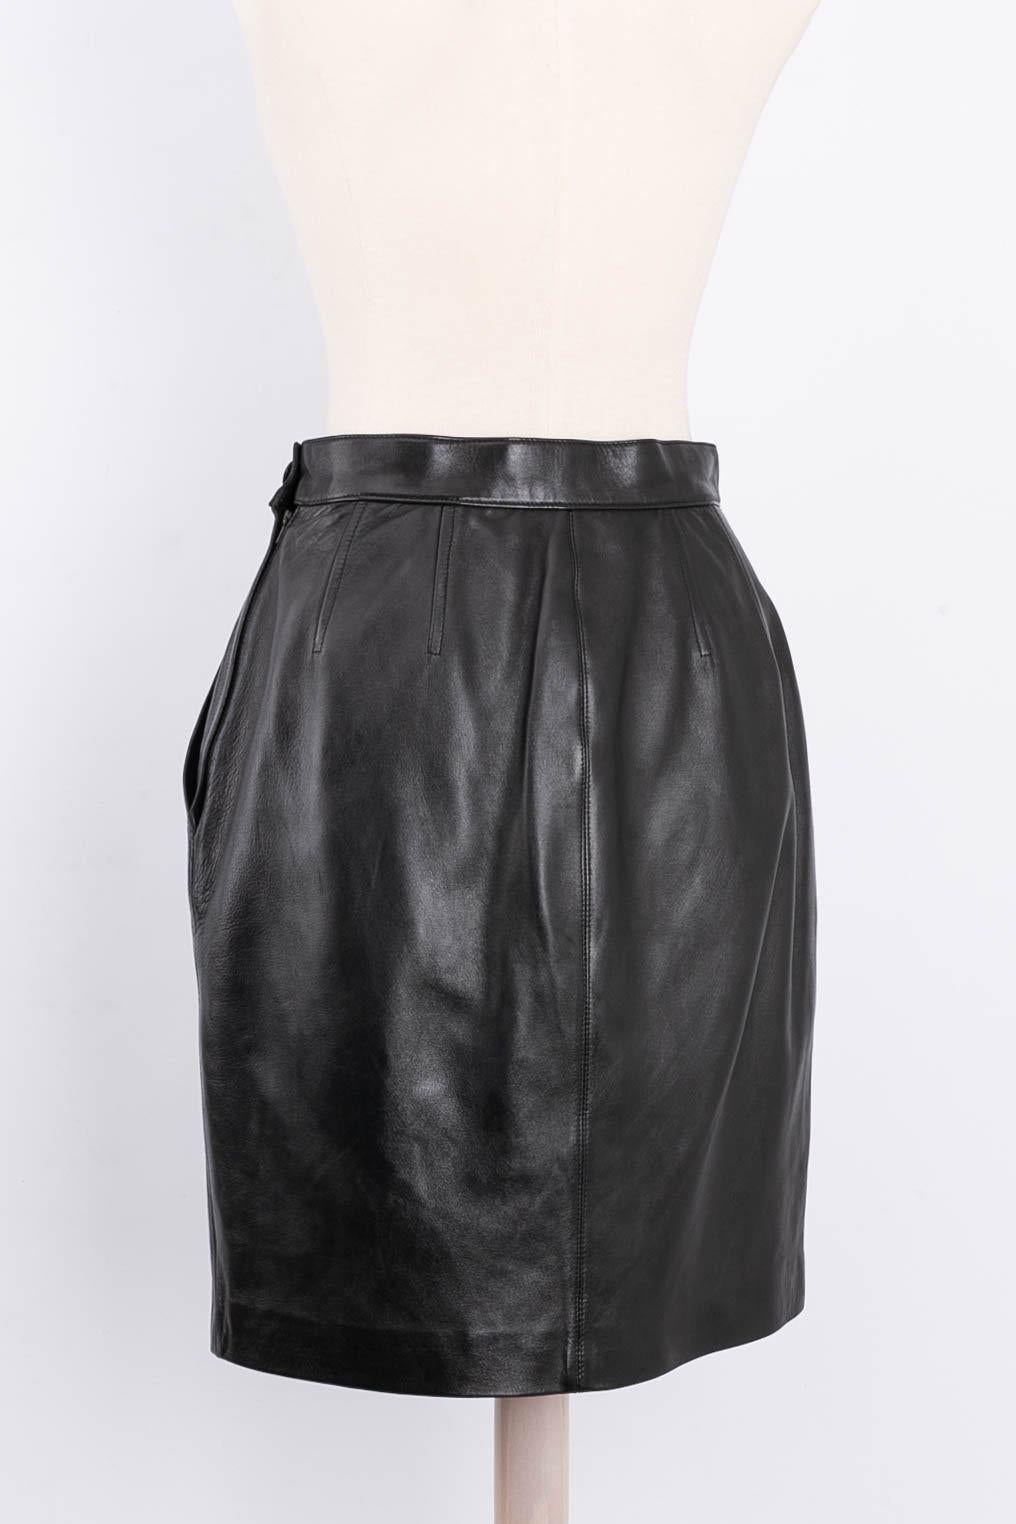 Yves Saint Laurent Leather Jacket and Skirt Set For Sale 1